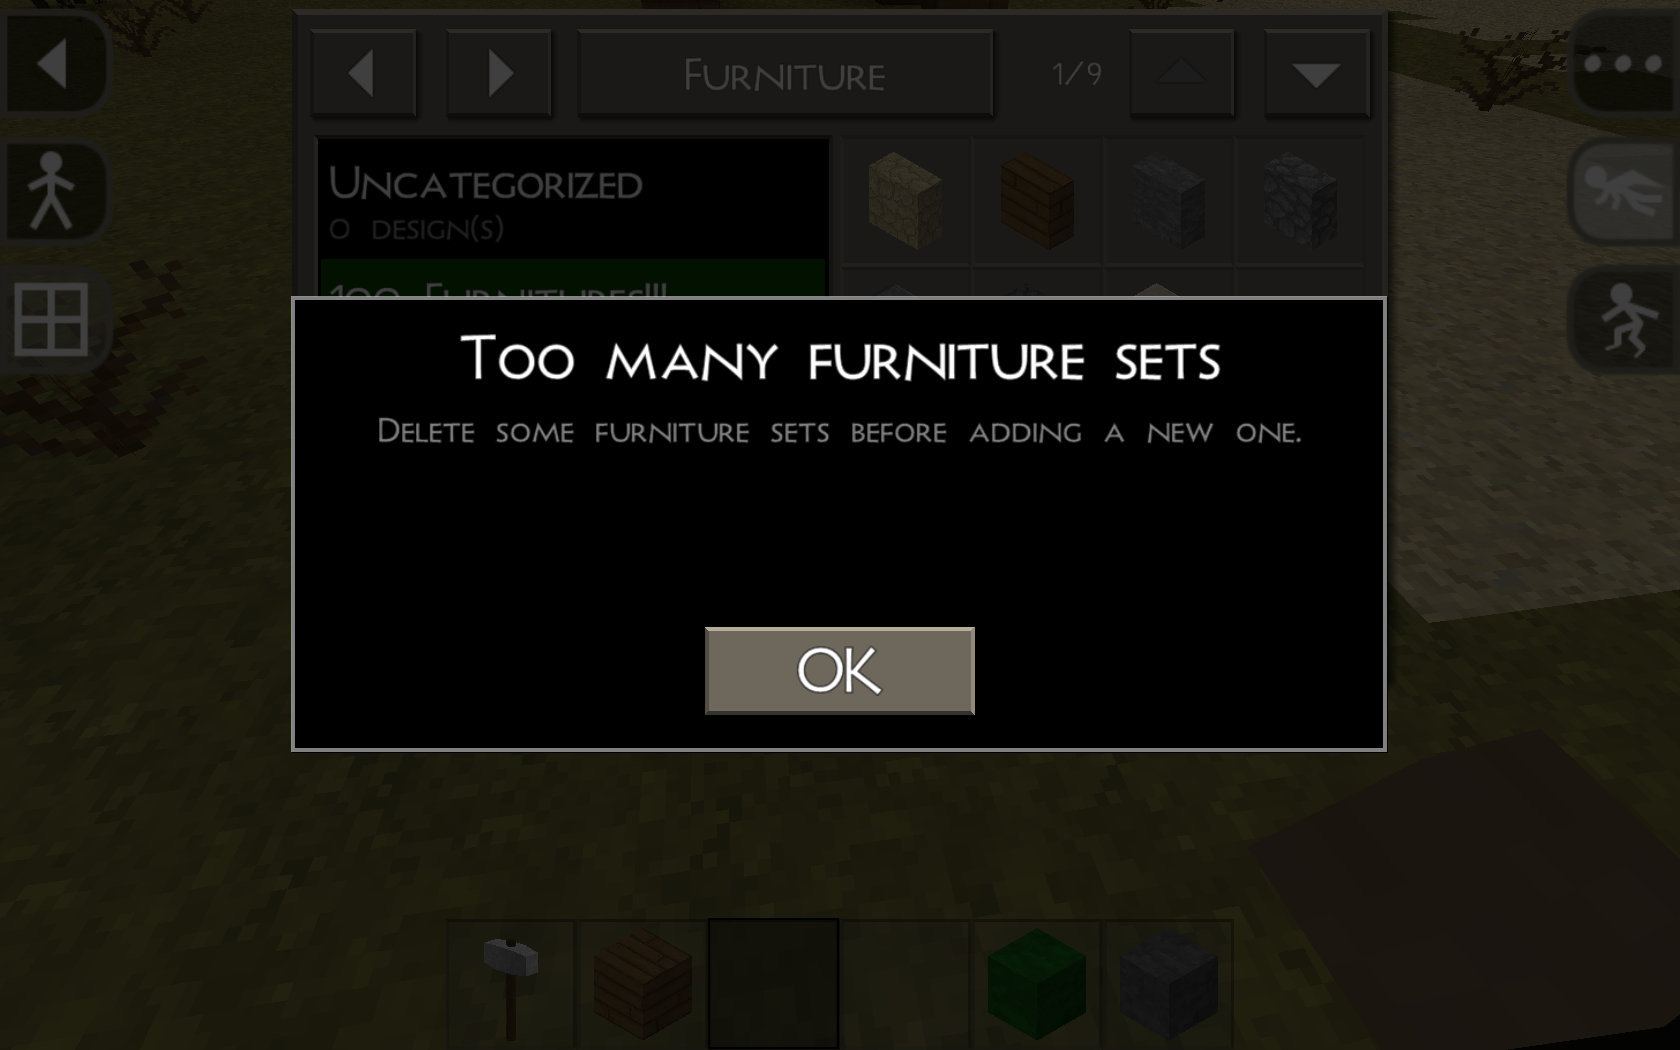 File:Chair and table in Survivalcraft.png - Wikipedia